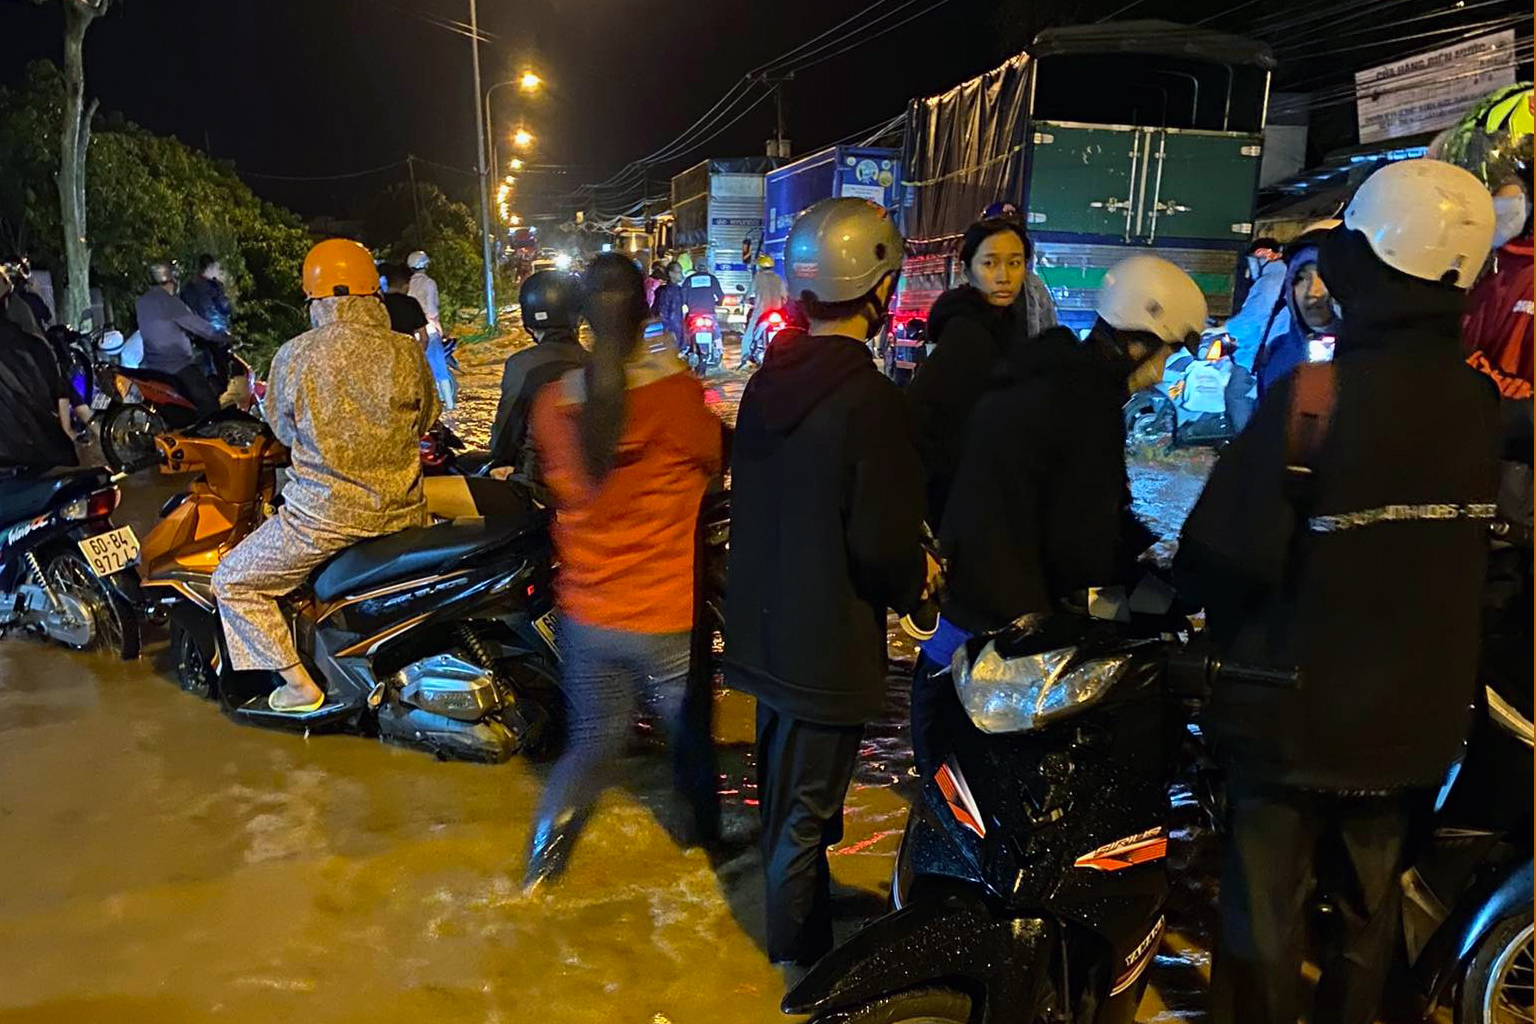 A heavy rain interrupts traffic on Provincial Road 763 in Dinh Quan District, Dong Nai Province, Vietnam, September 23, 2022. Photo: An Binh / Tuoi Tre